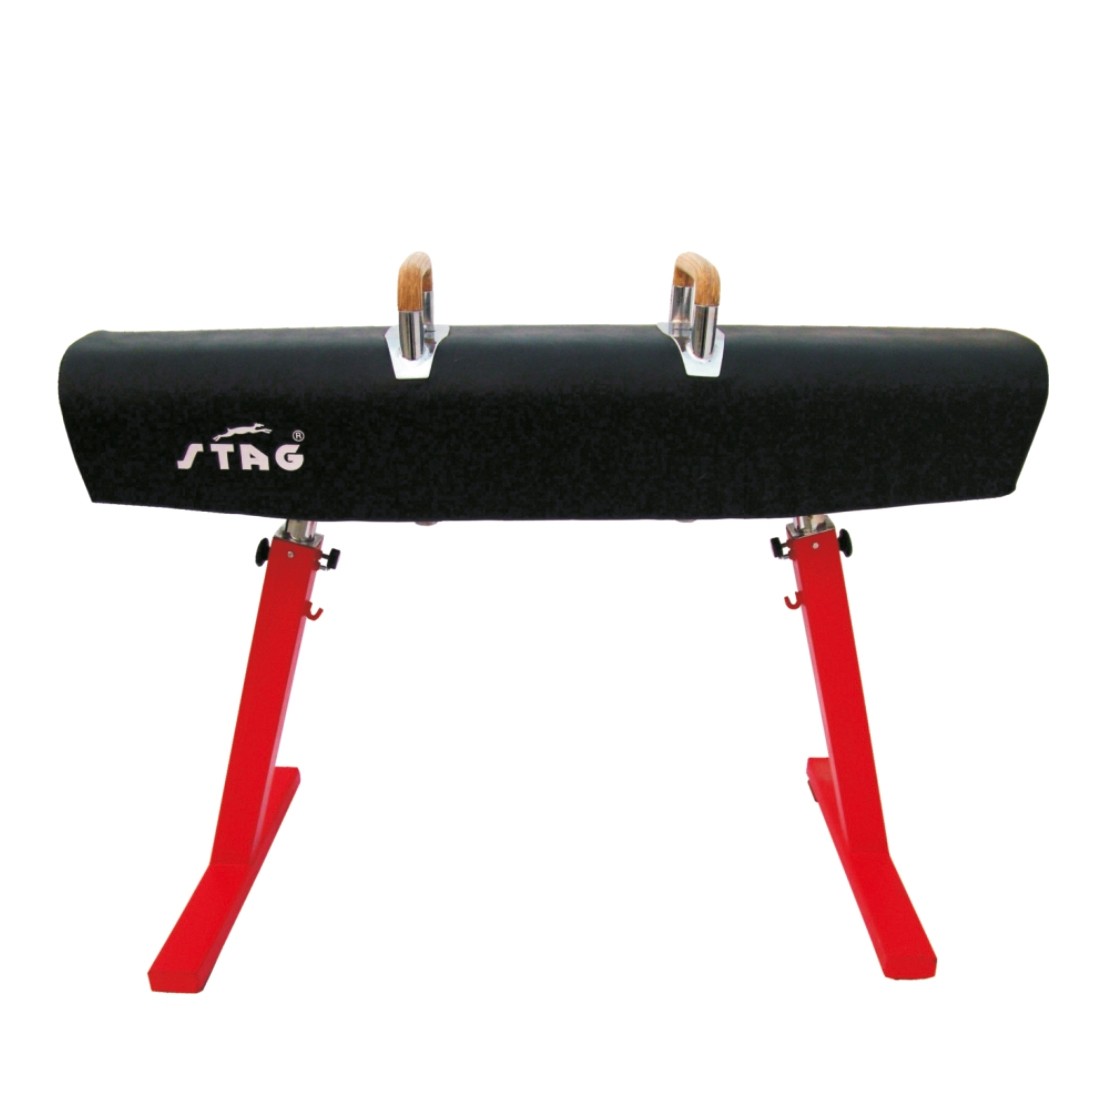 STAG POMMEL HORSE COMPETITION ADJUSTABLE HEIGHT 1.10MTR TO 1.50MTR